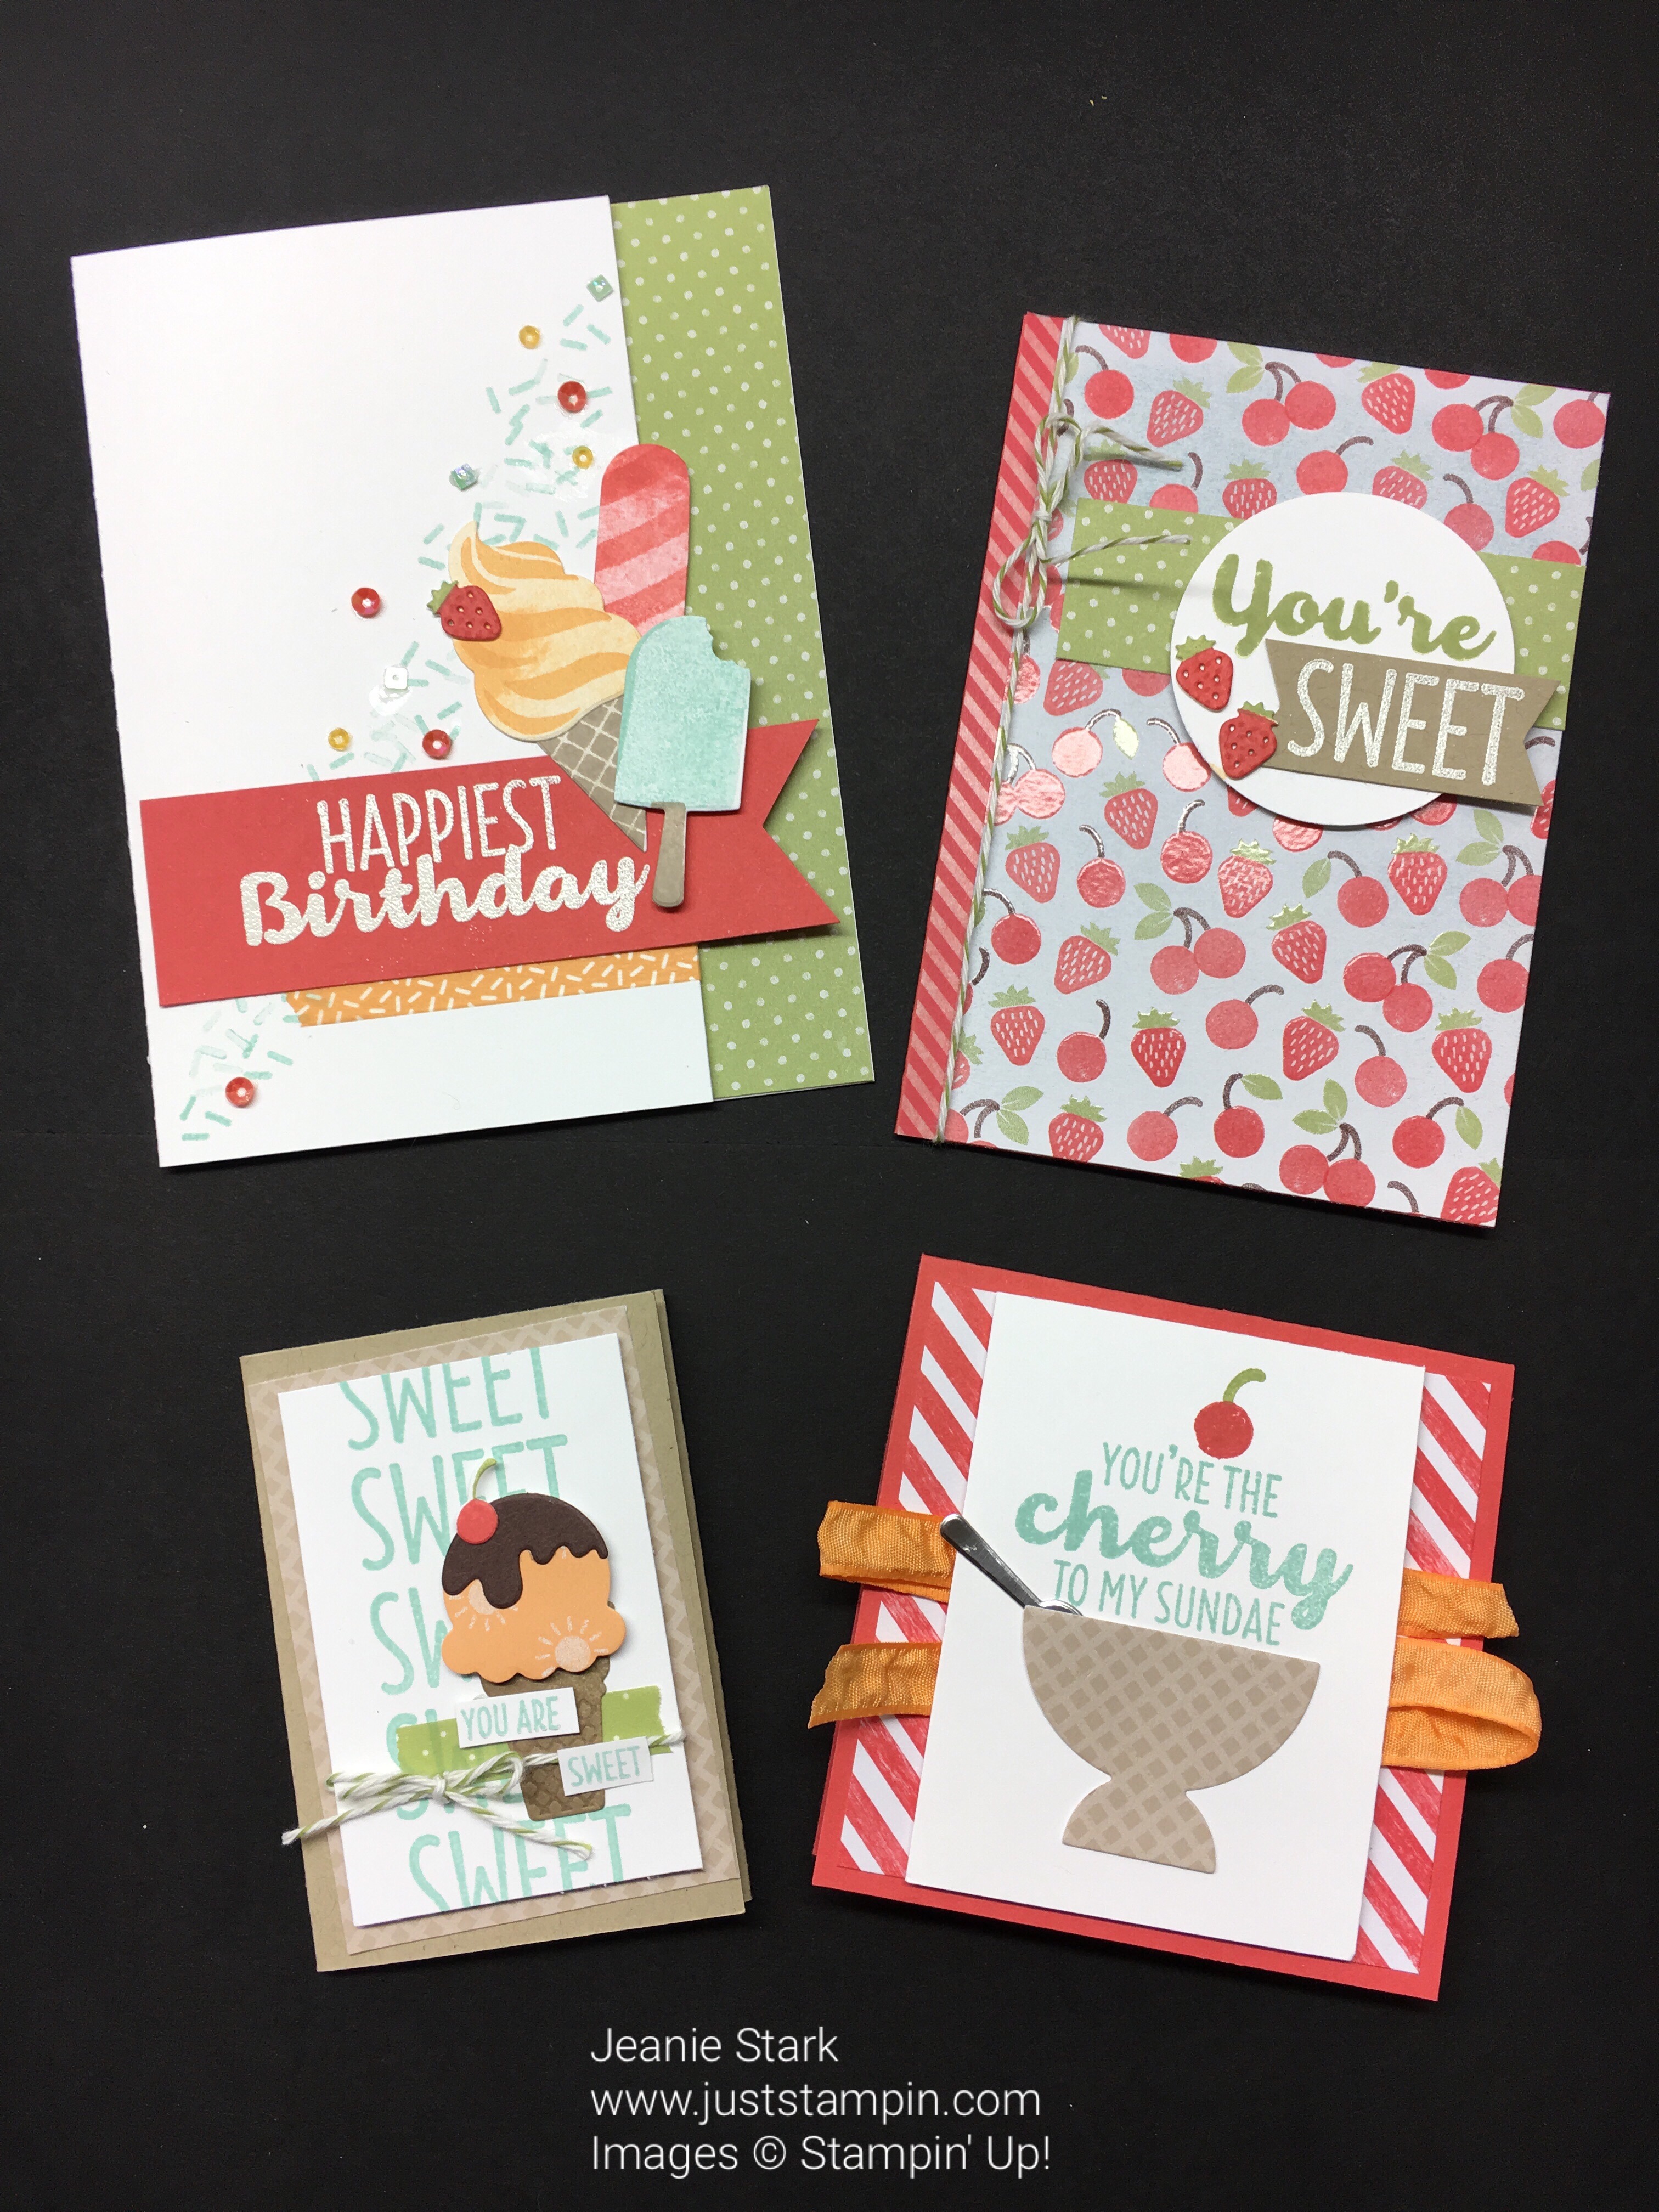 Stampin Up Cool Treats card class - Jeanie Stark StampinUp